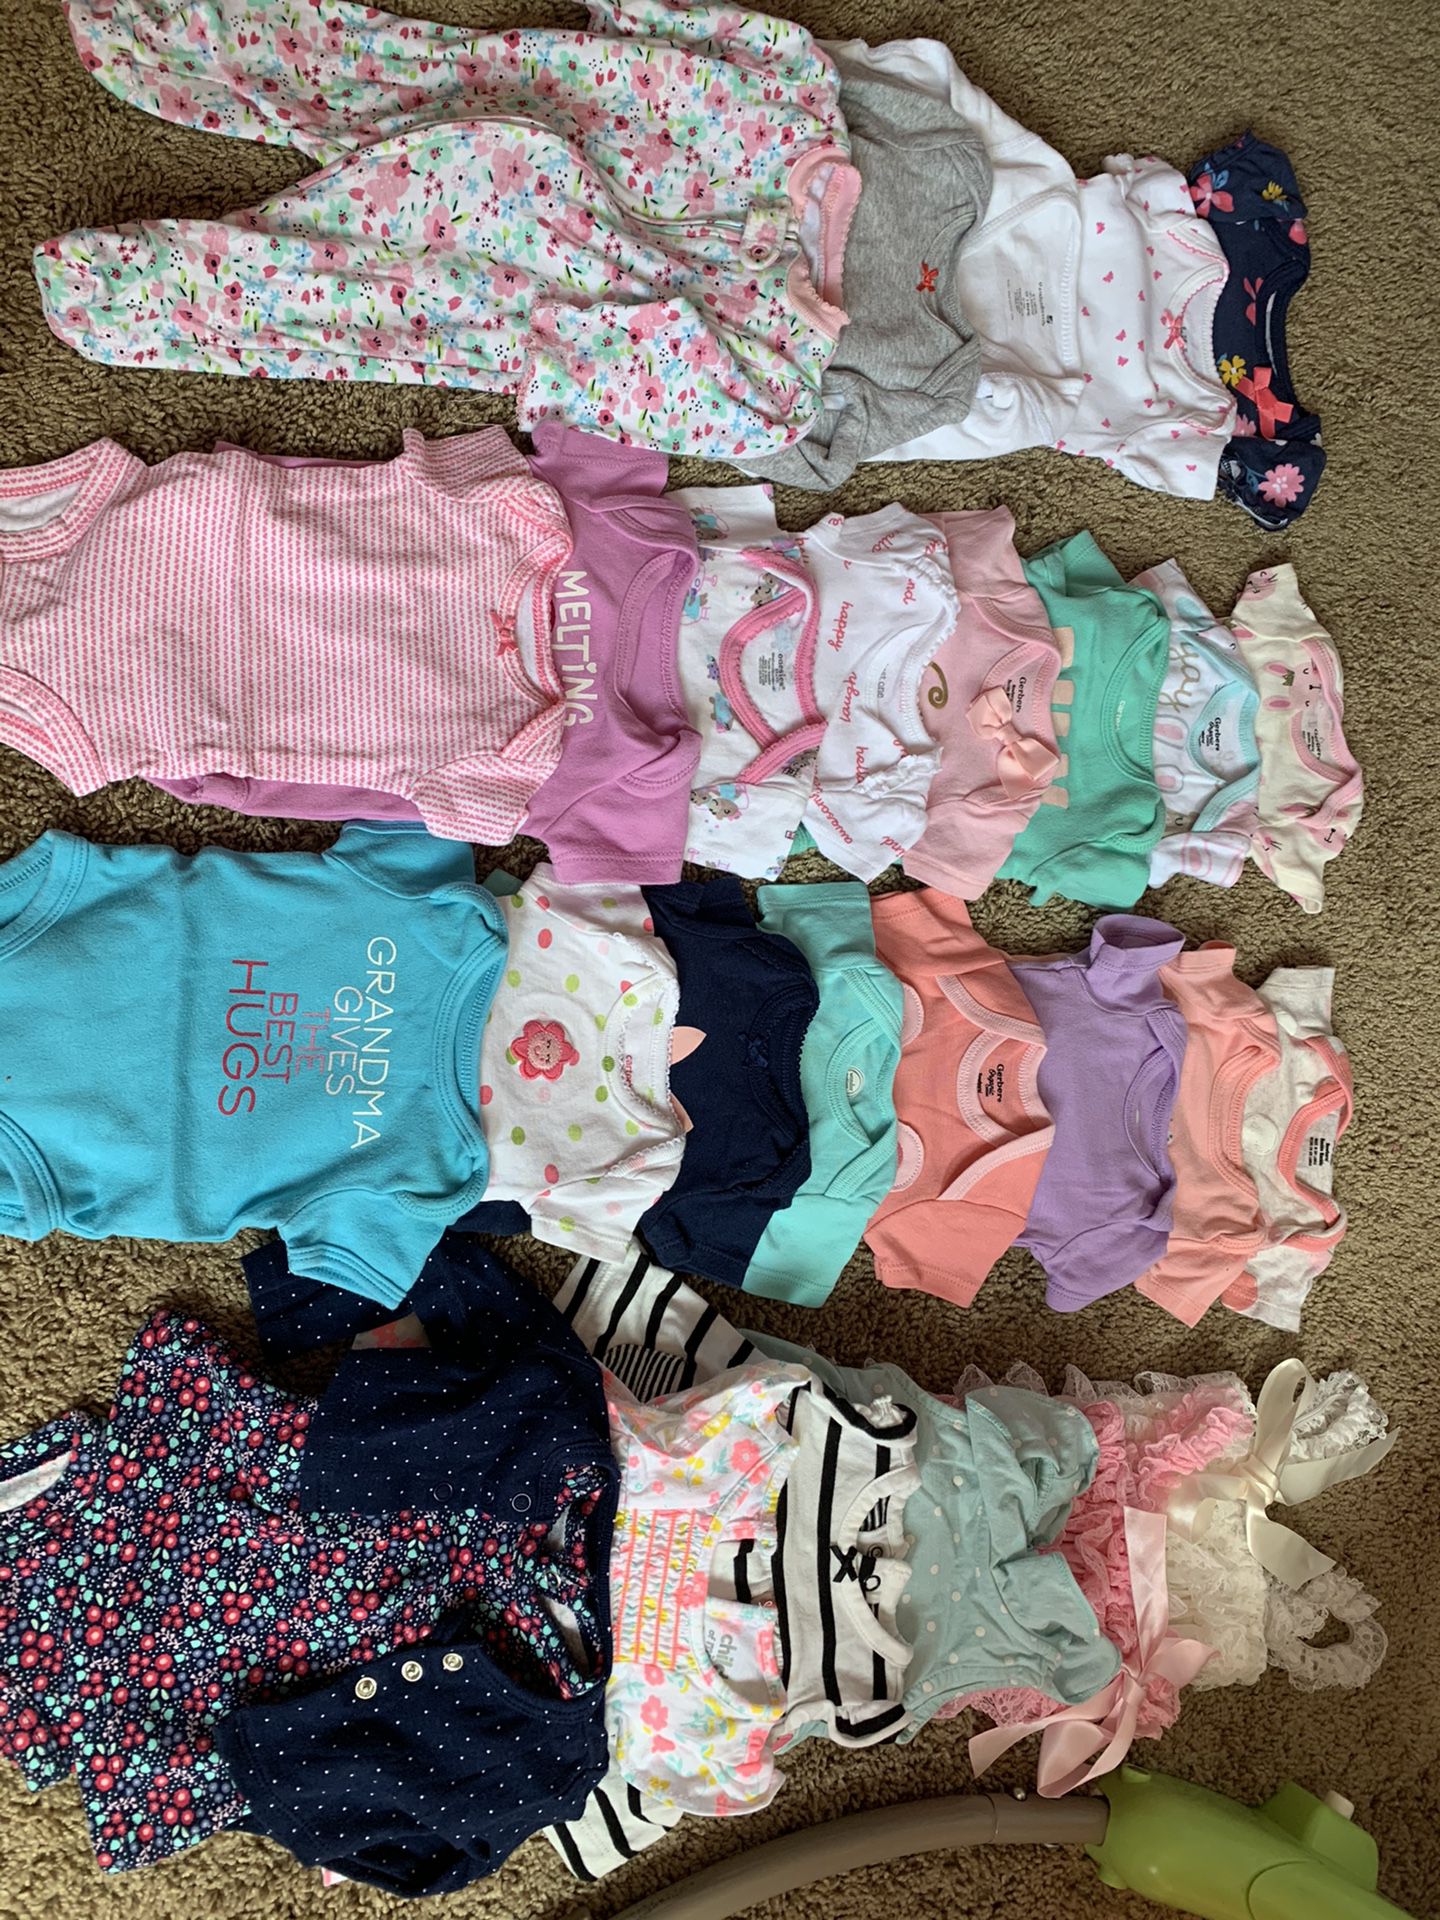 Baby girl clothes ranging from newborn to 6-9 months